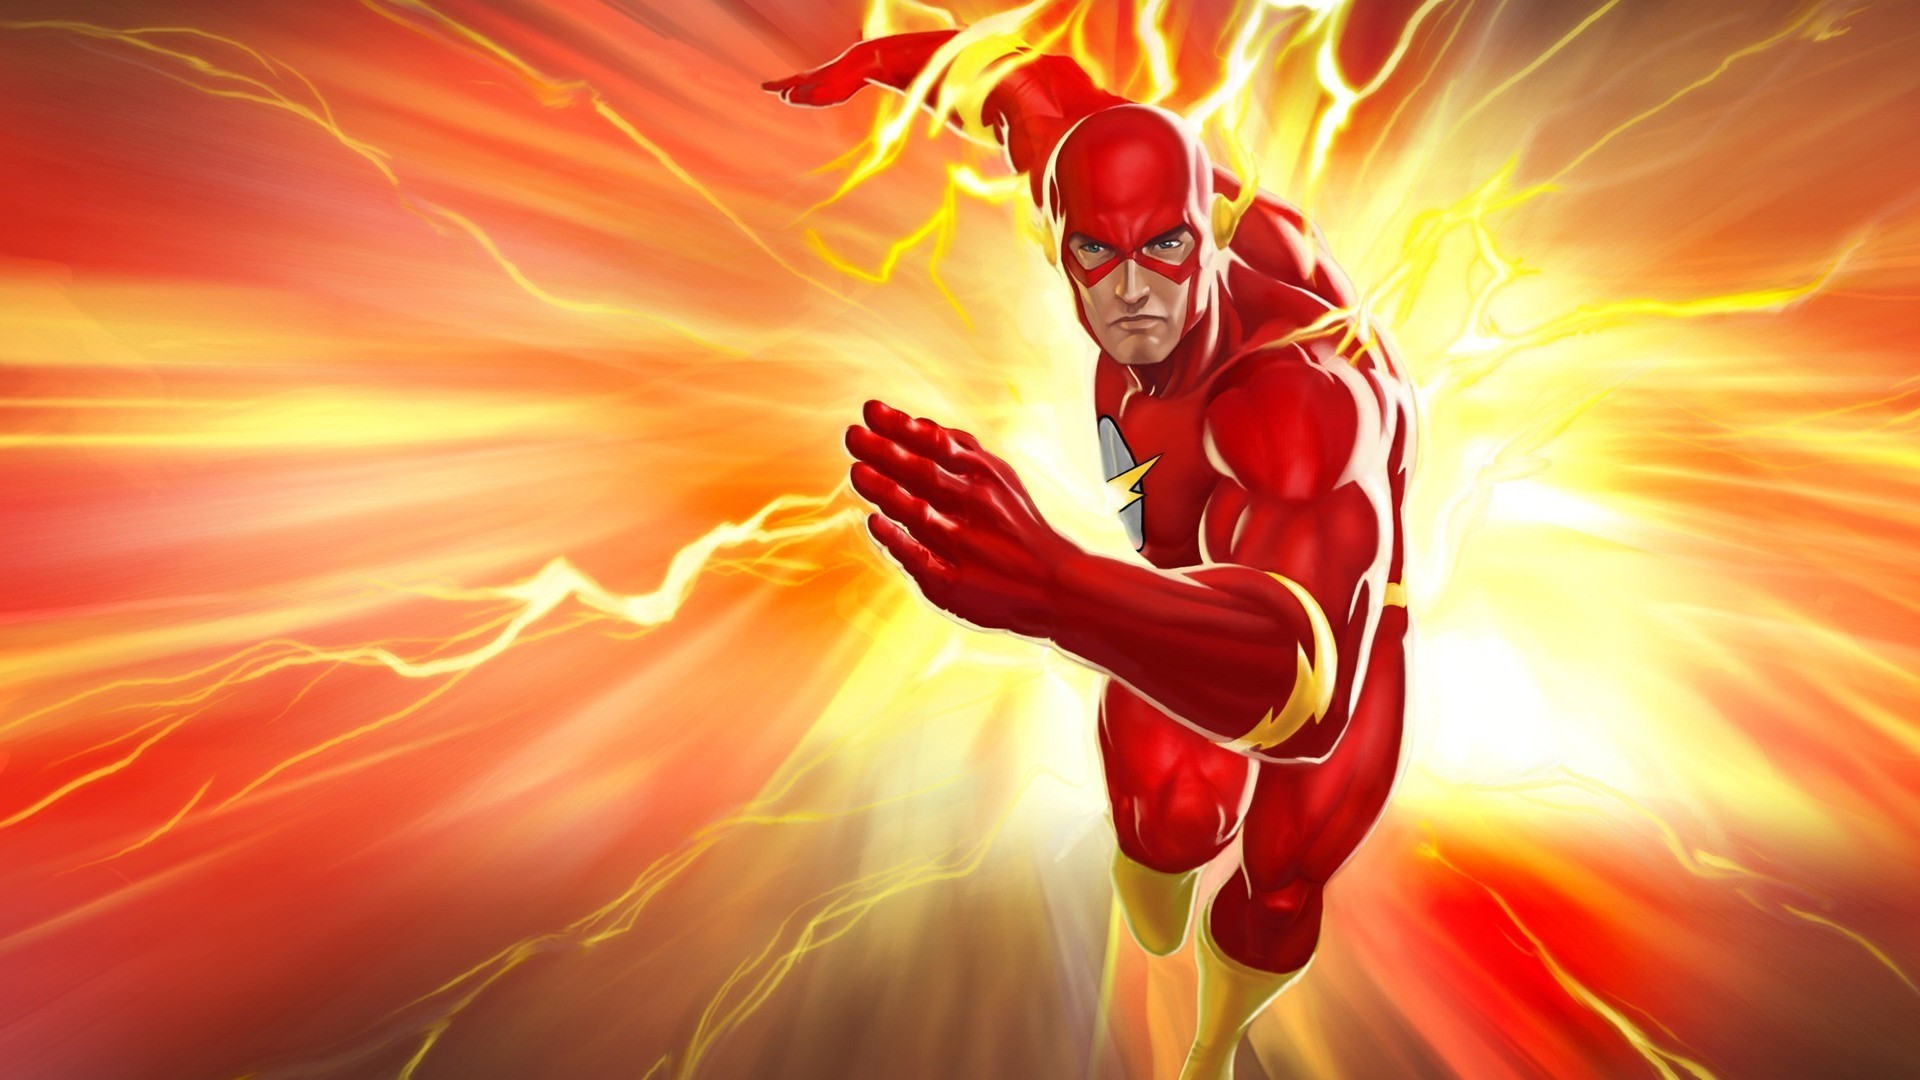 1920x1080 Download free the flash wallpapers for your mobile phone Zedge